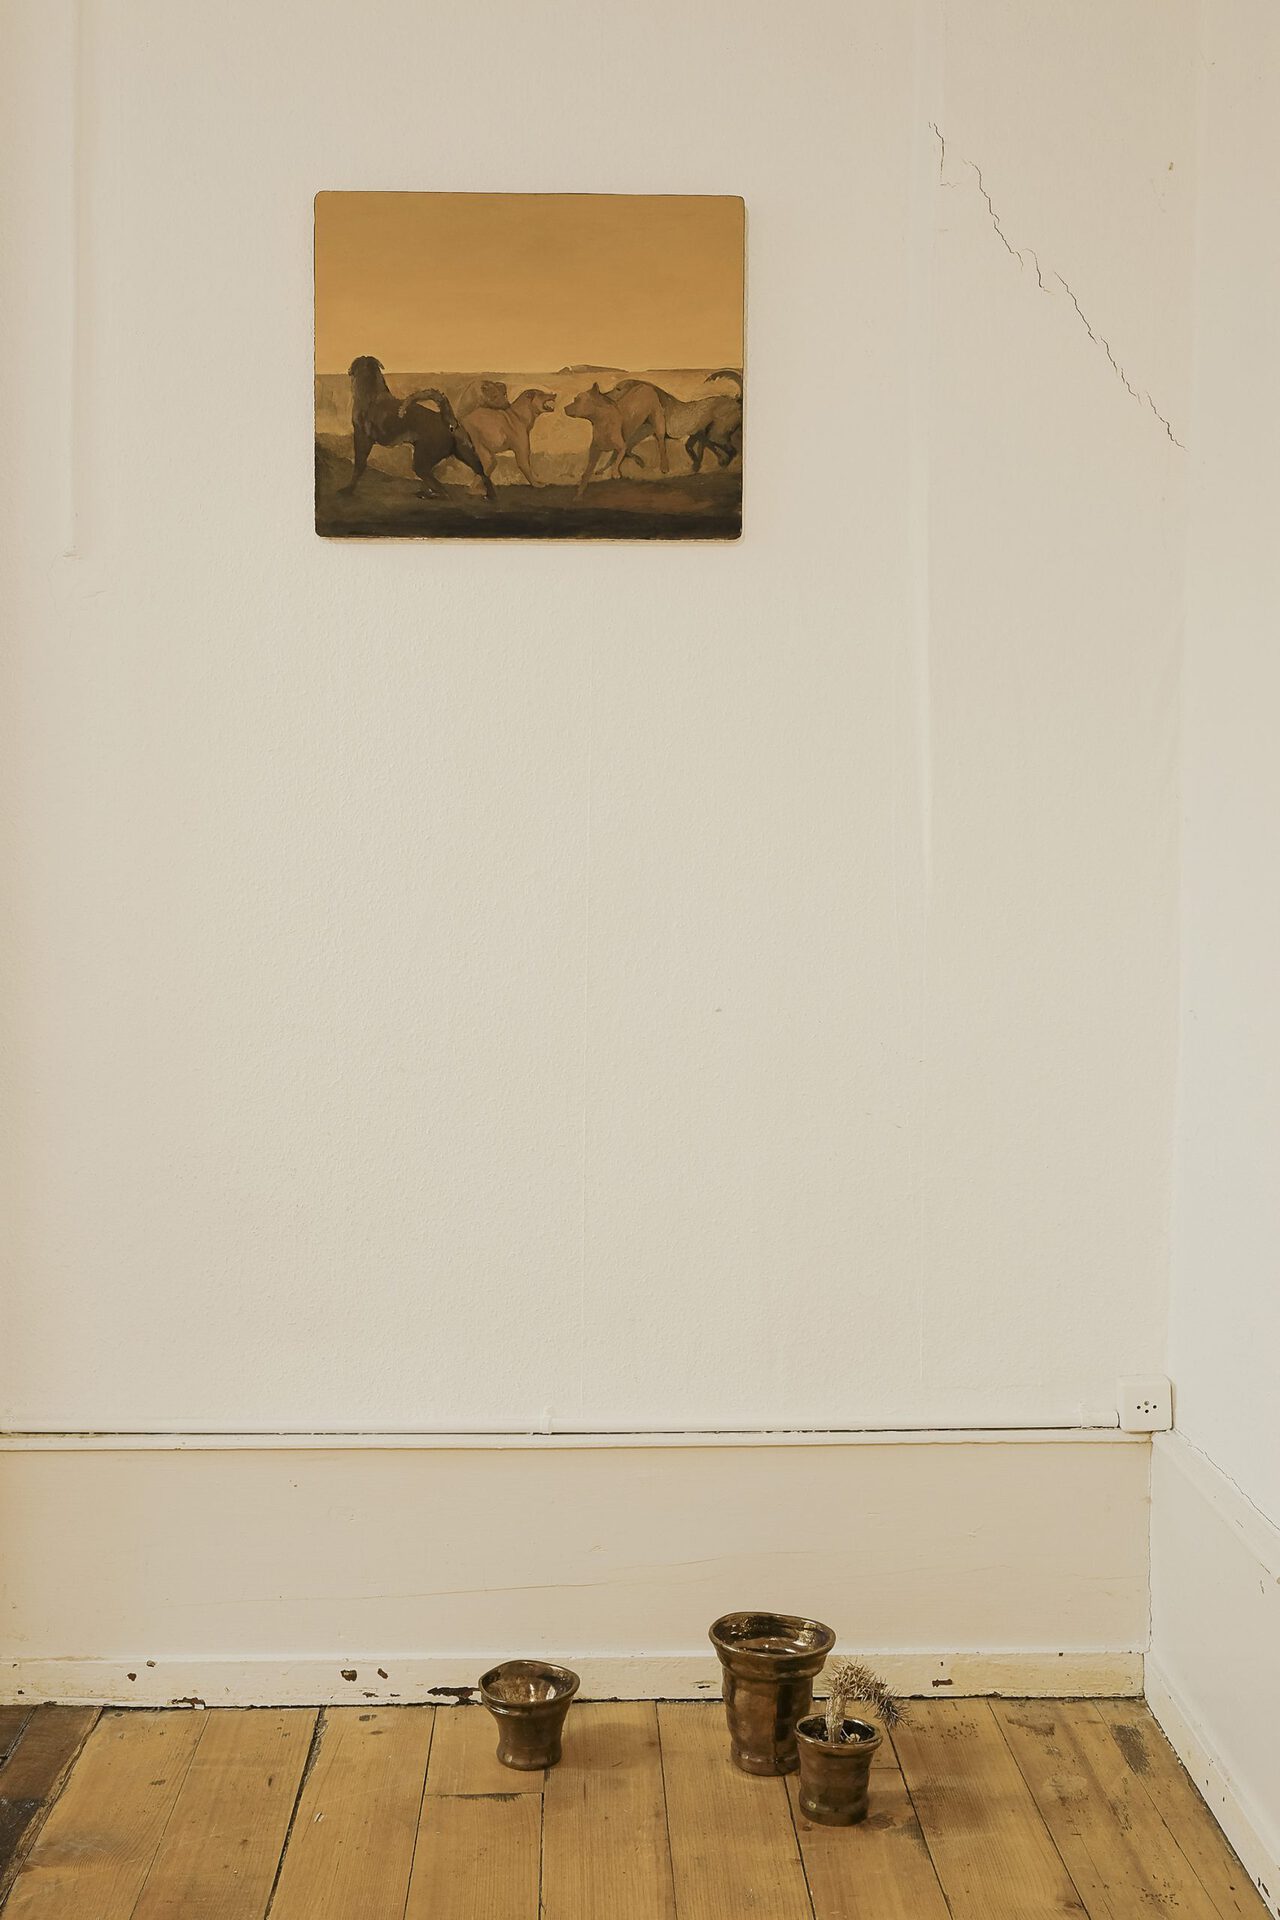 On the wall: Robert Brambora, Untitled, 2020, oil on wood, copper, 40 x 50 cm / On the floor: Untitled, 2020, ceramic, copper glaze, various dimensions